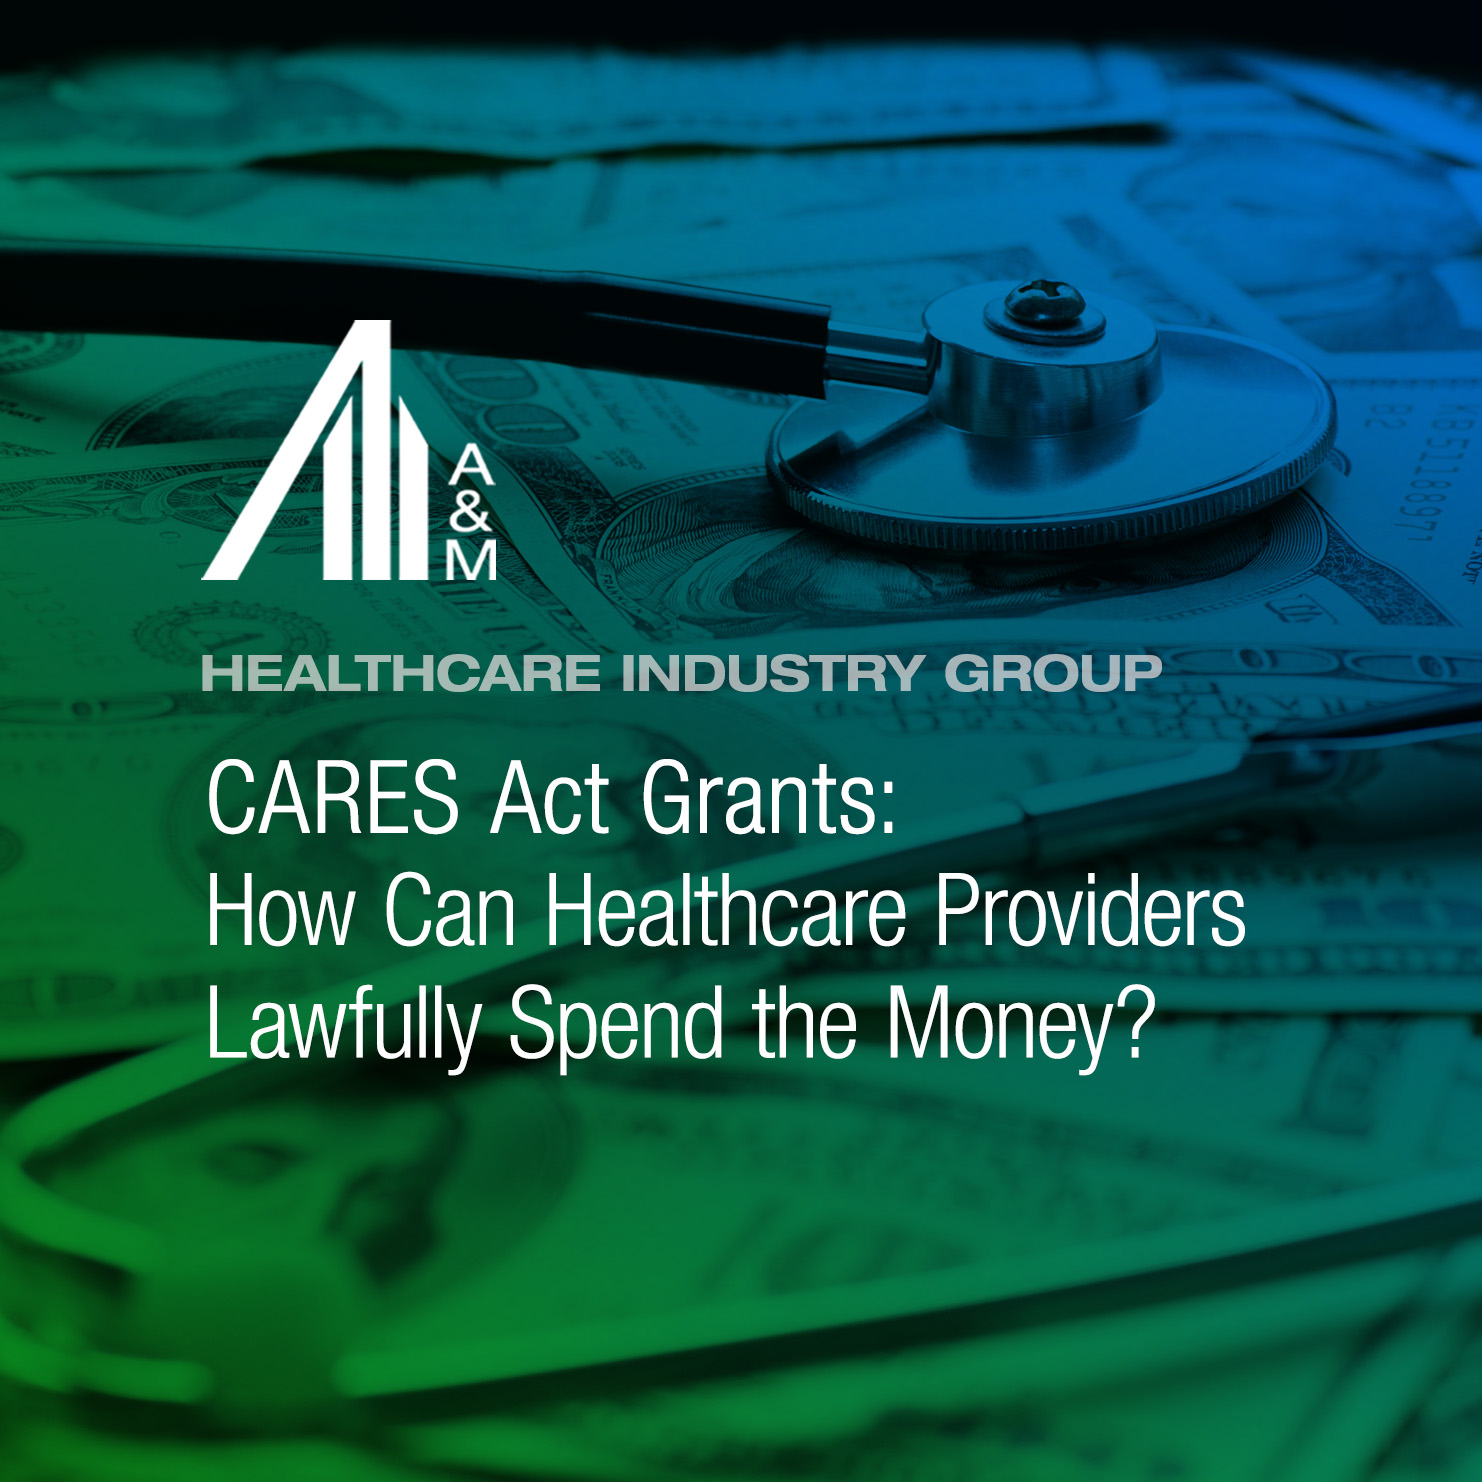 CARES Act Grants: How Can Healthcare Providers Lawfully Spend the Money?